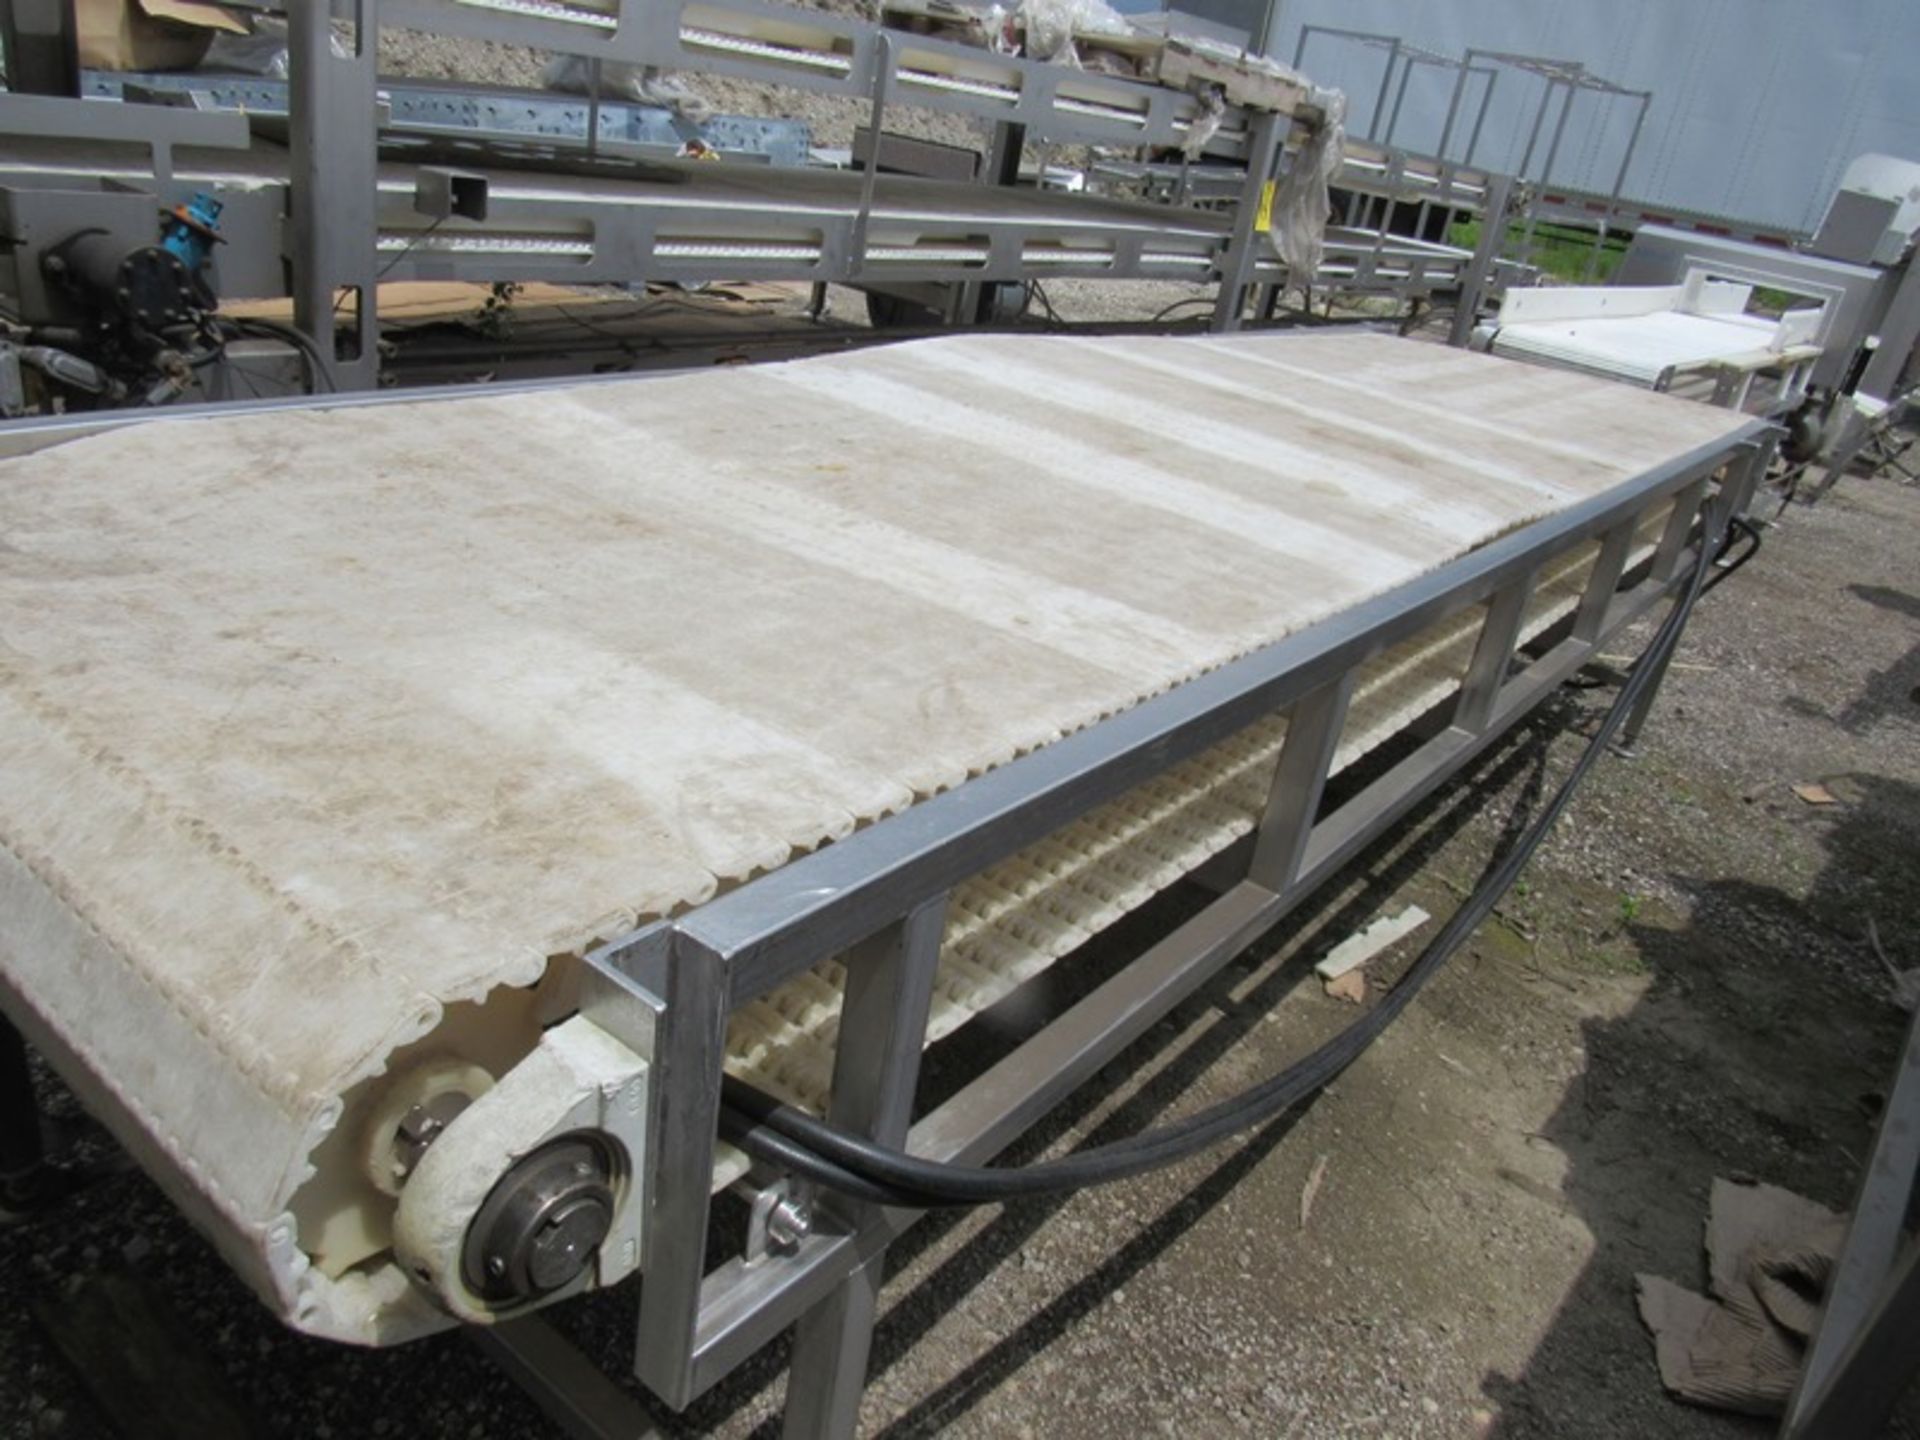 Stainless Steel Conveyor, 36" Wide X 13' Long, hydraulic drive (Loading Fee: $150.00 - Rigger: